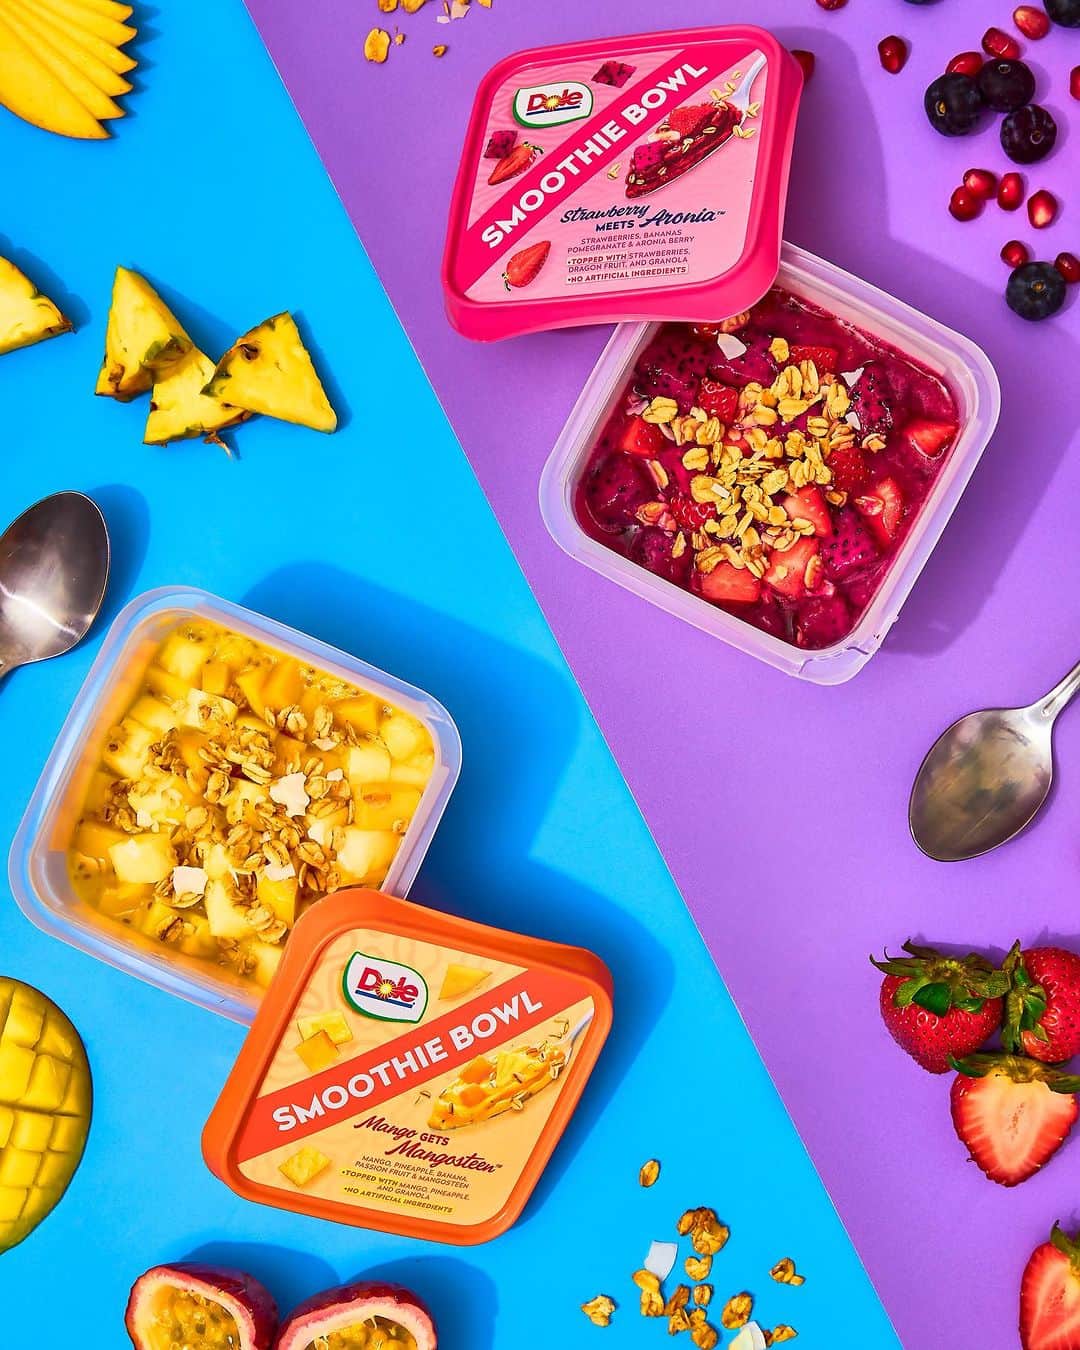 Dole Packaged Foods（ドール）のインスタグラム：「Dive into a tropical paradise with NEW Dole® Smoothie Bowls, a vibrant, & exotic escape for your taste buds! Are you team Mango or team Strawberry? 🍓🥭 #DoleSmoothieBowls #SmoothieBowls #TropicalFlavors #Smoothie #TeamStrawberry #TeamMango」